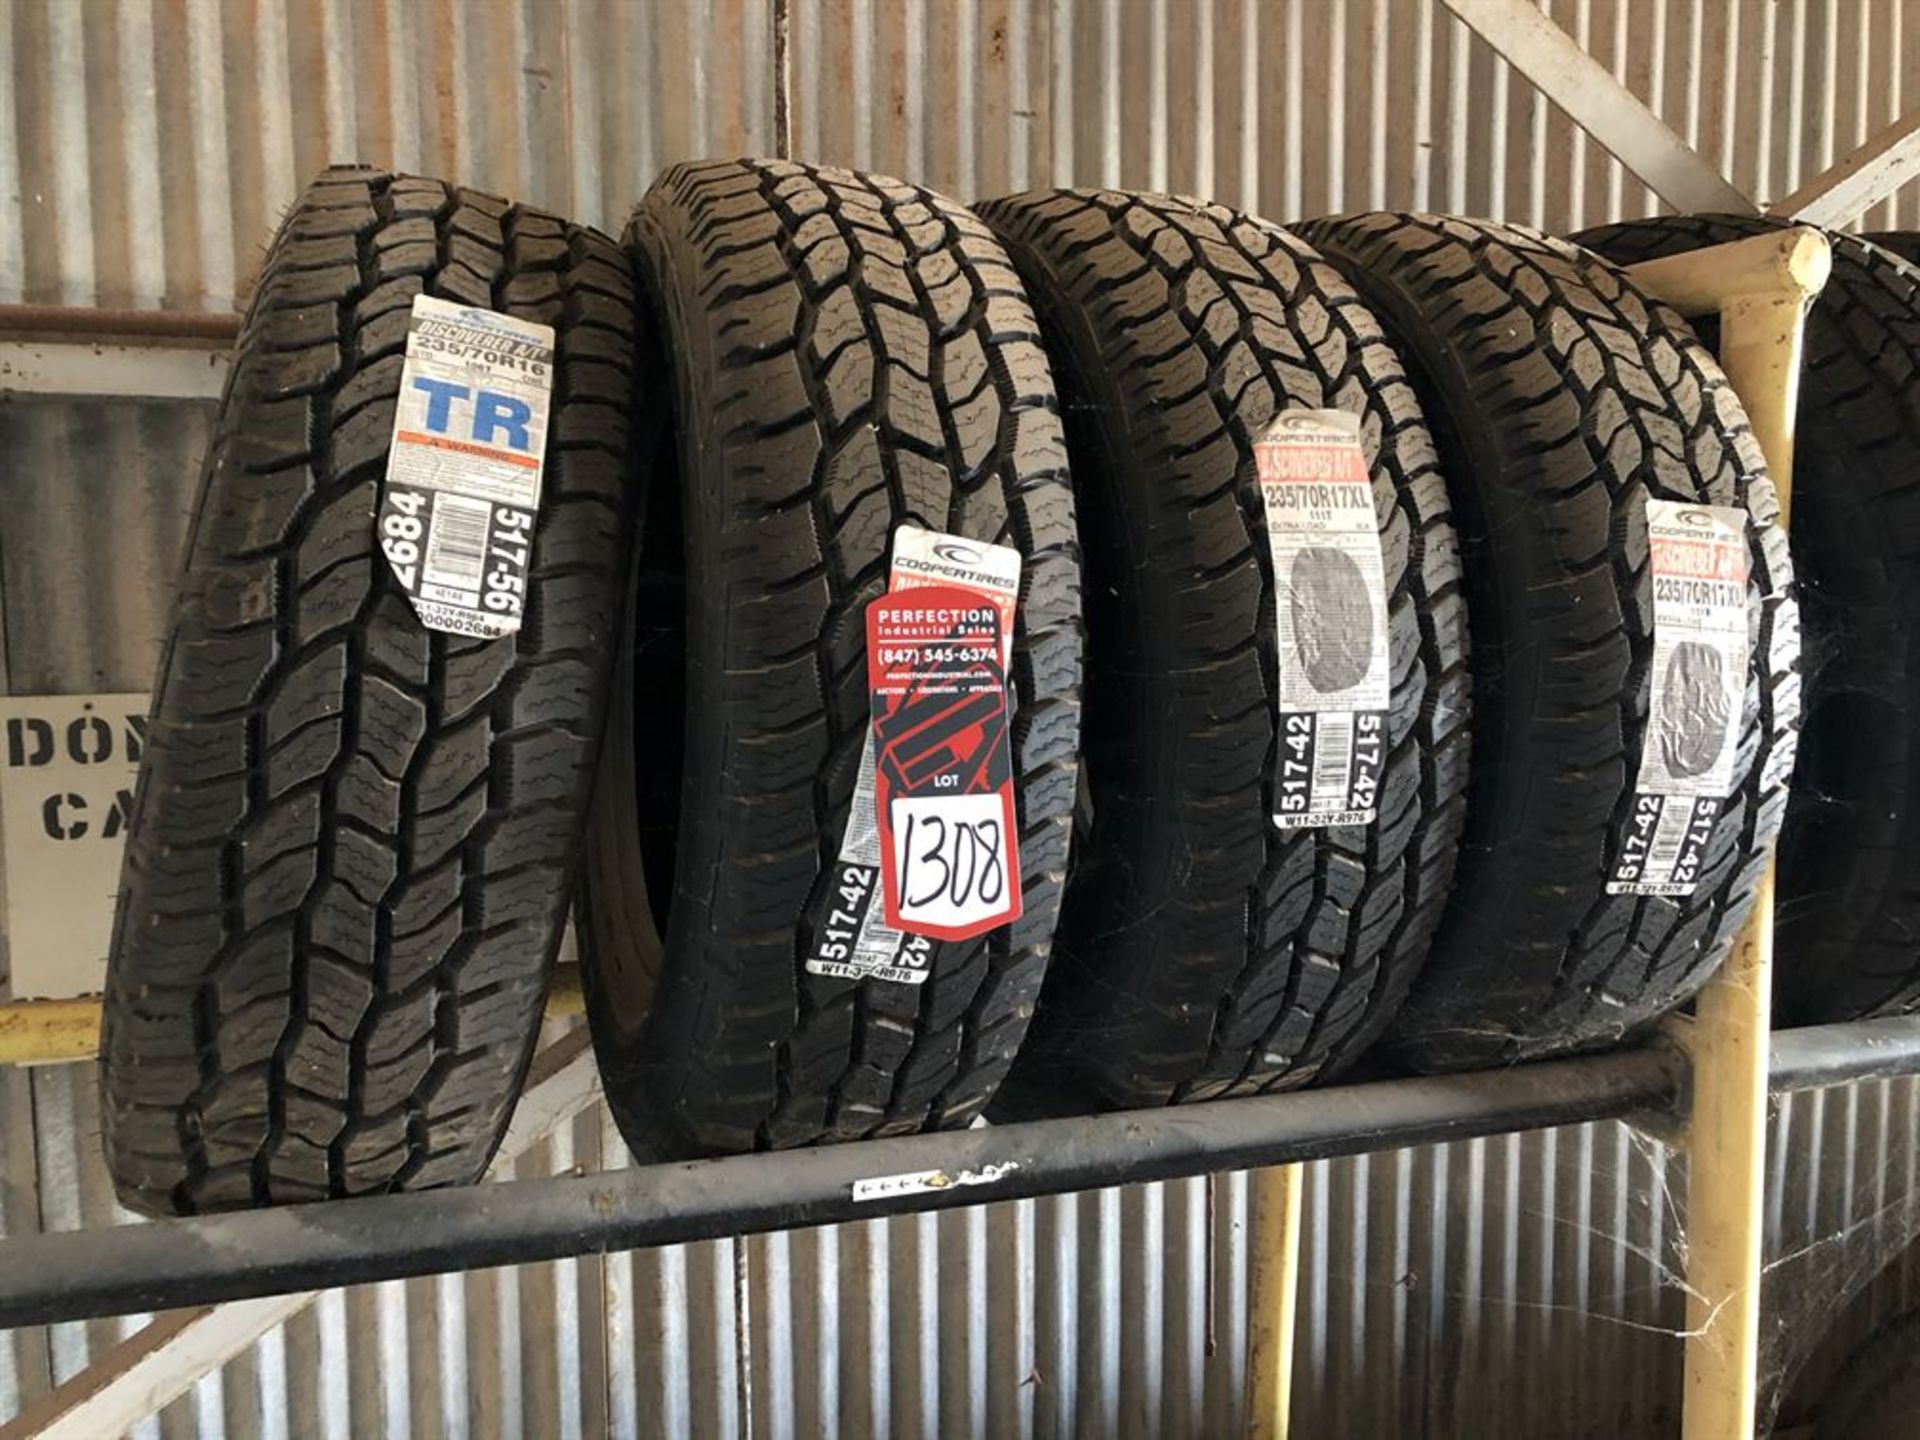 Lot Comprising of (3) New Cooper 235/70R 17XL Tires, and (1) New Cooper 235/70R 16 Tire (Location: